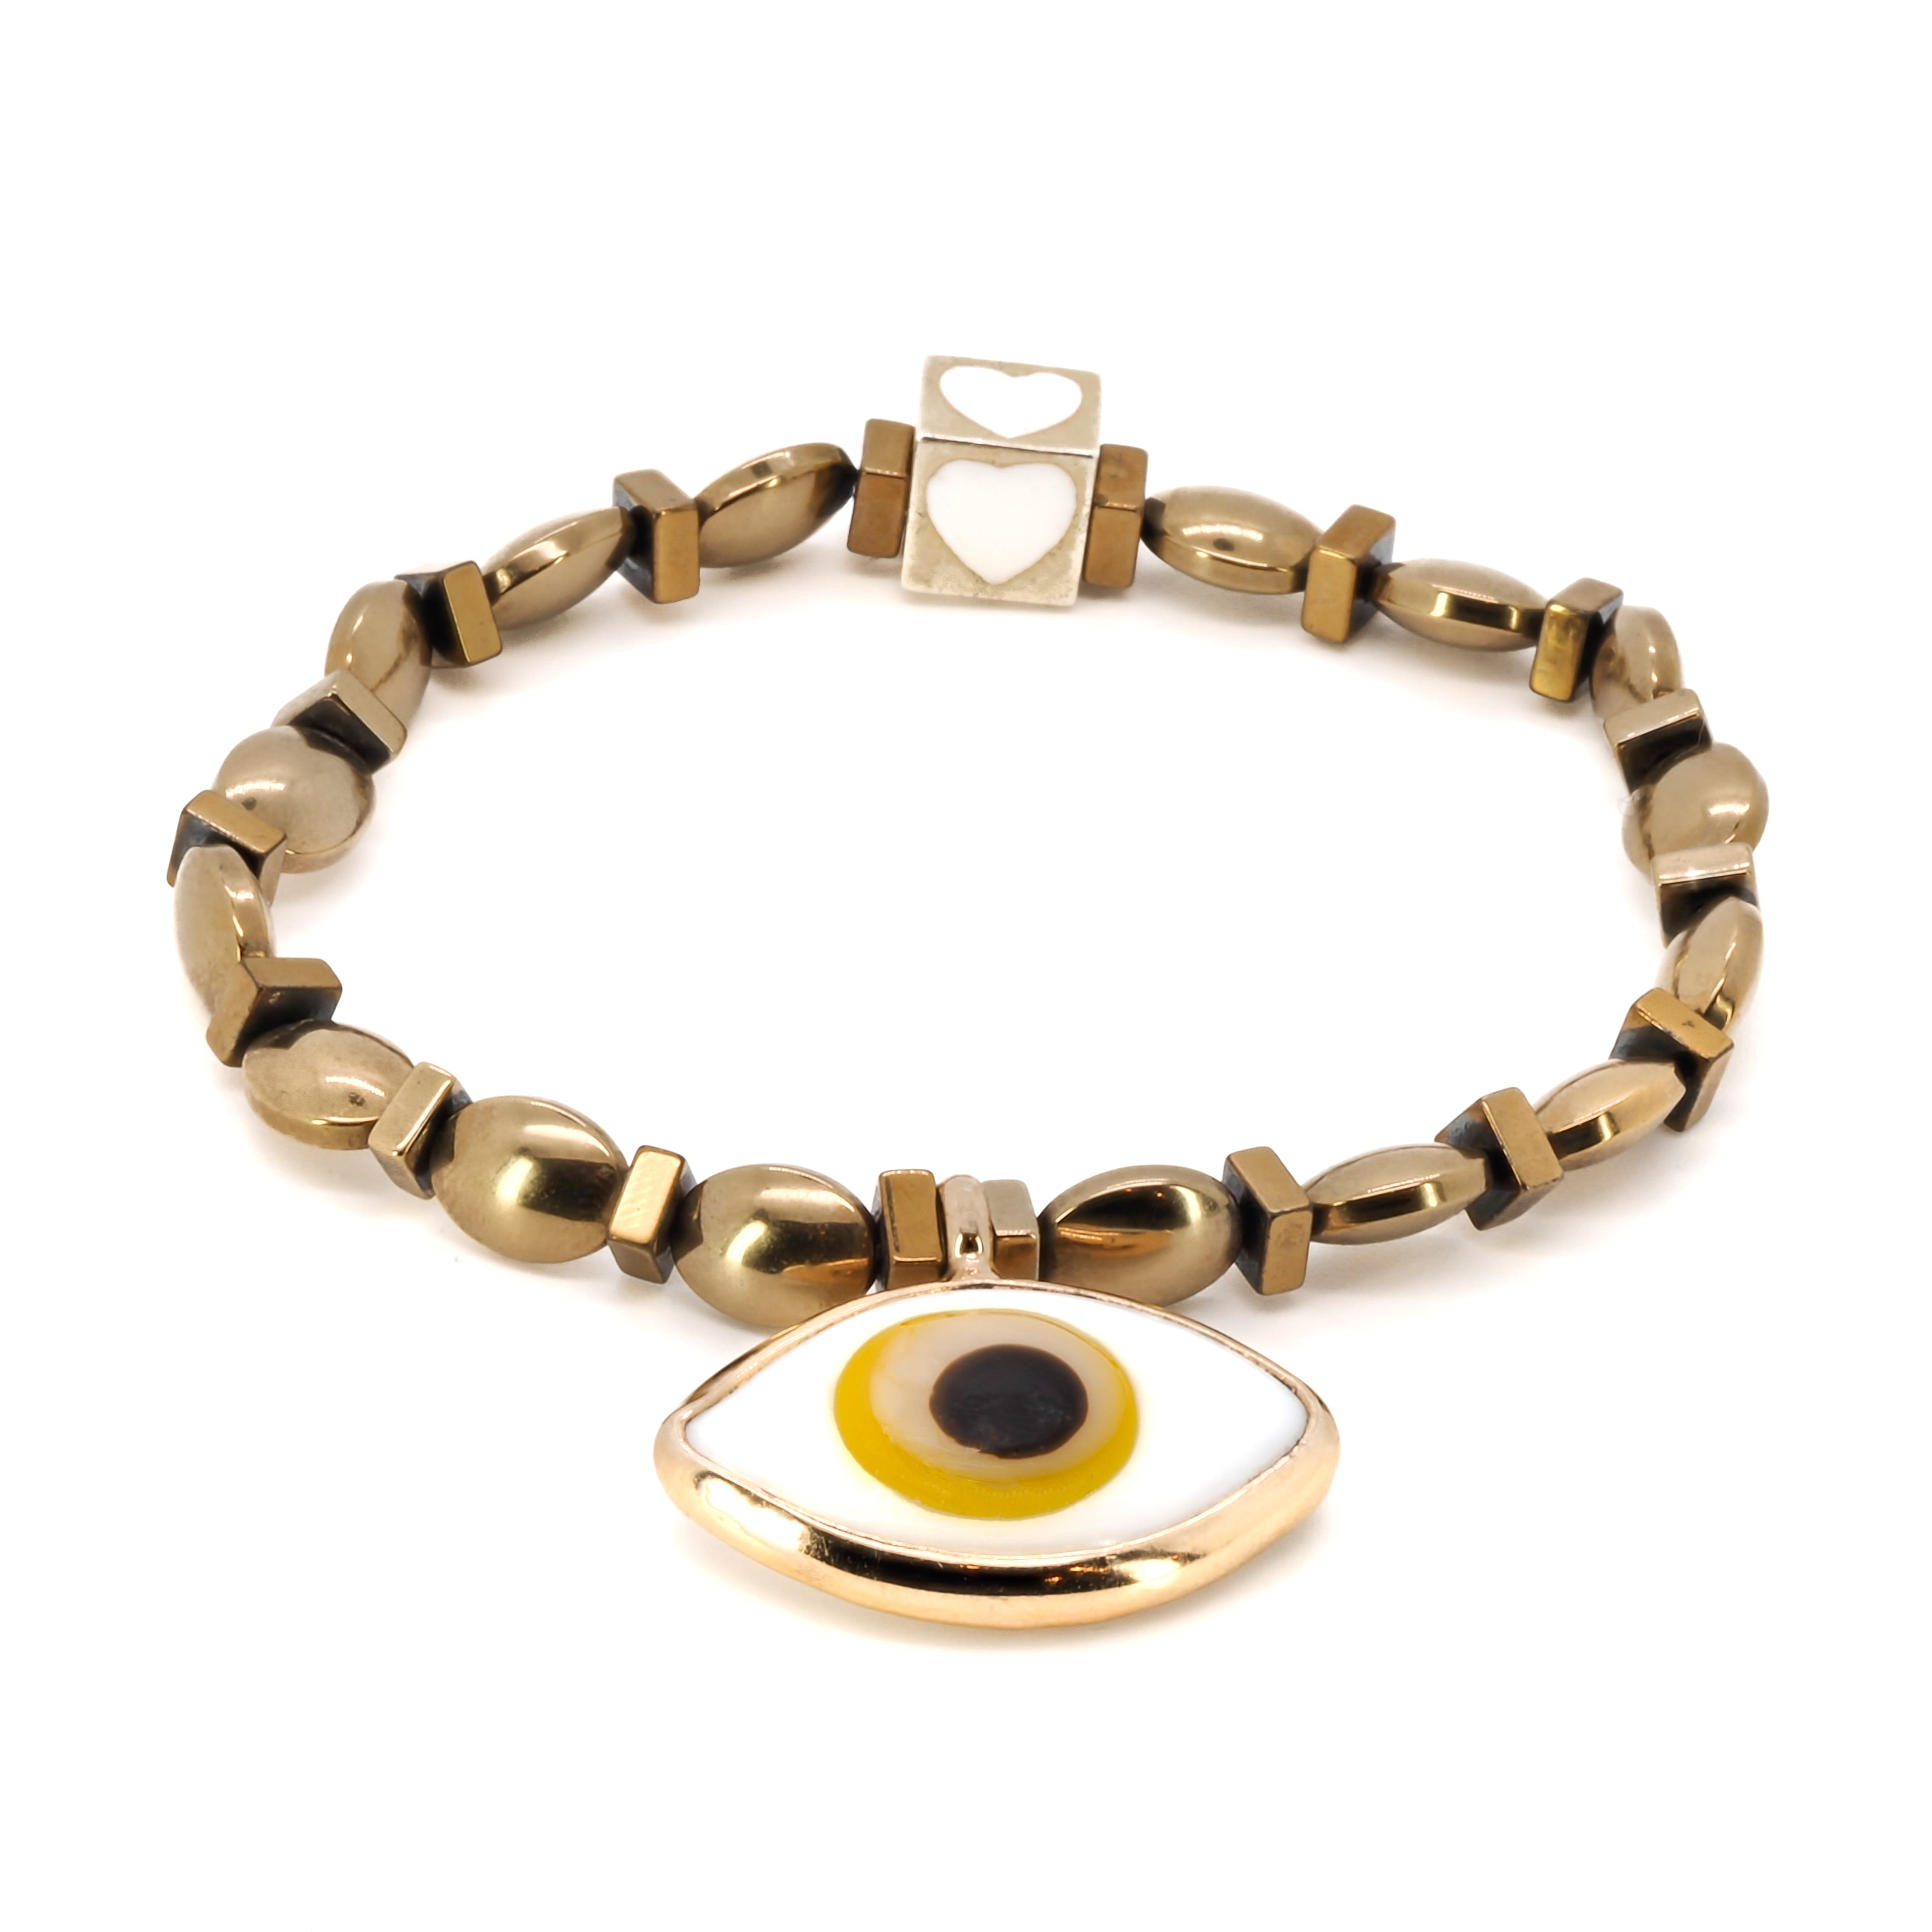 Embrace the elegance and protection of the Yellow Evil Eye Bracelet, featuring gold-colored hematite stone beads and a stunning evil eye charm.